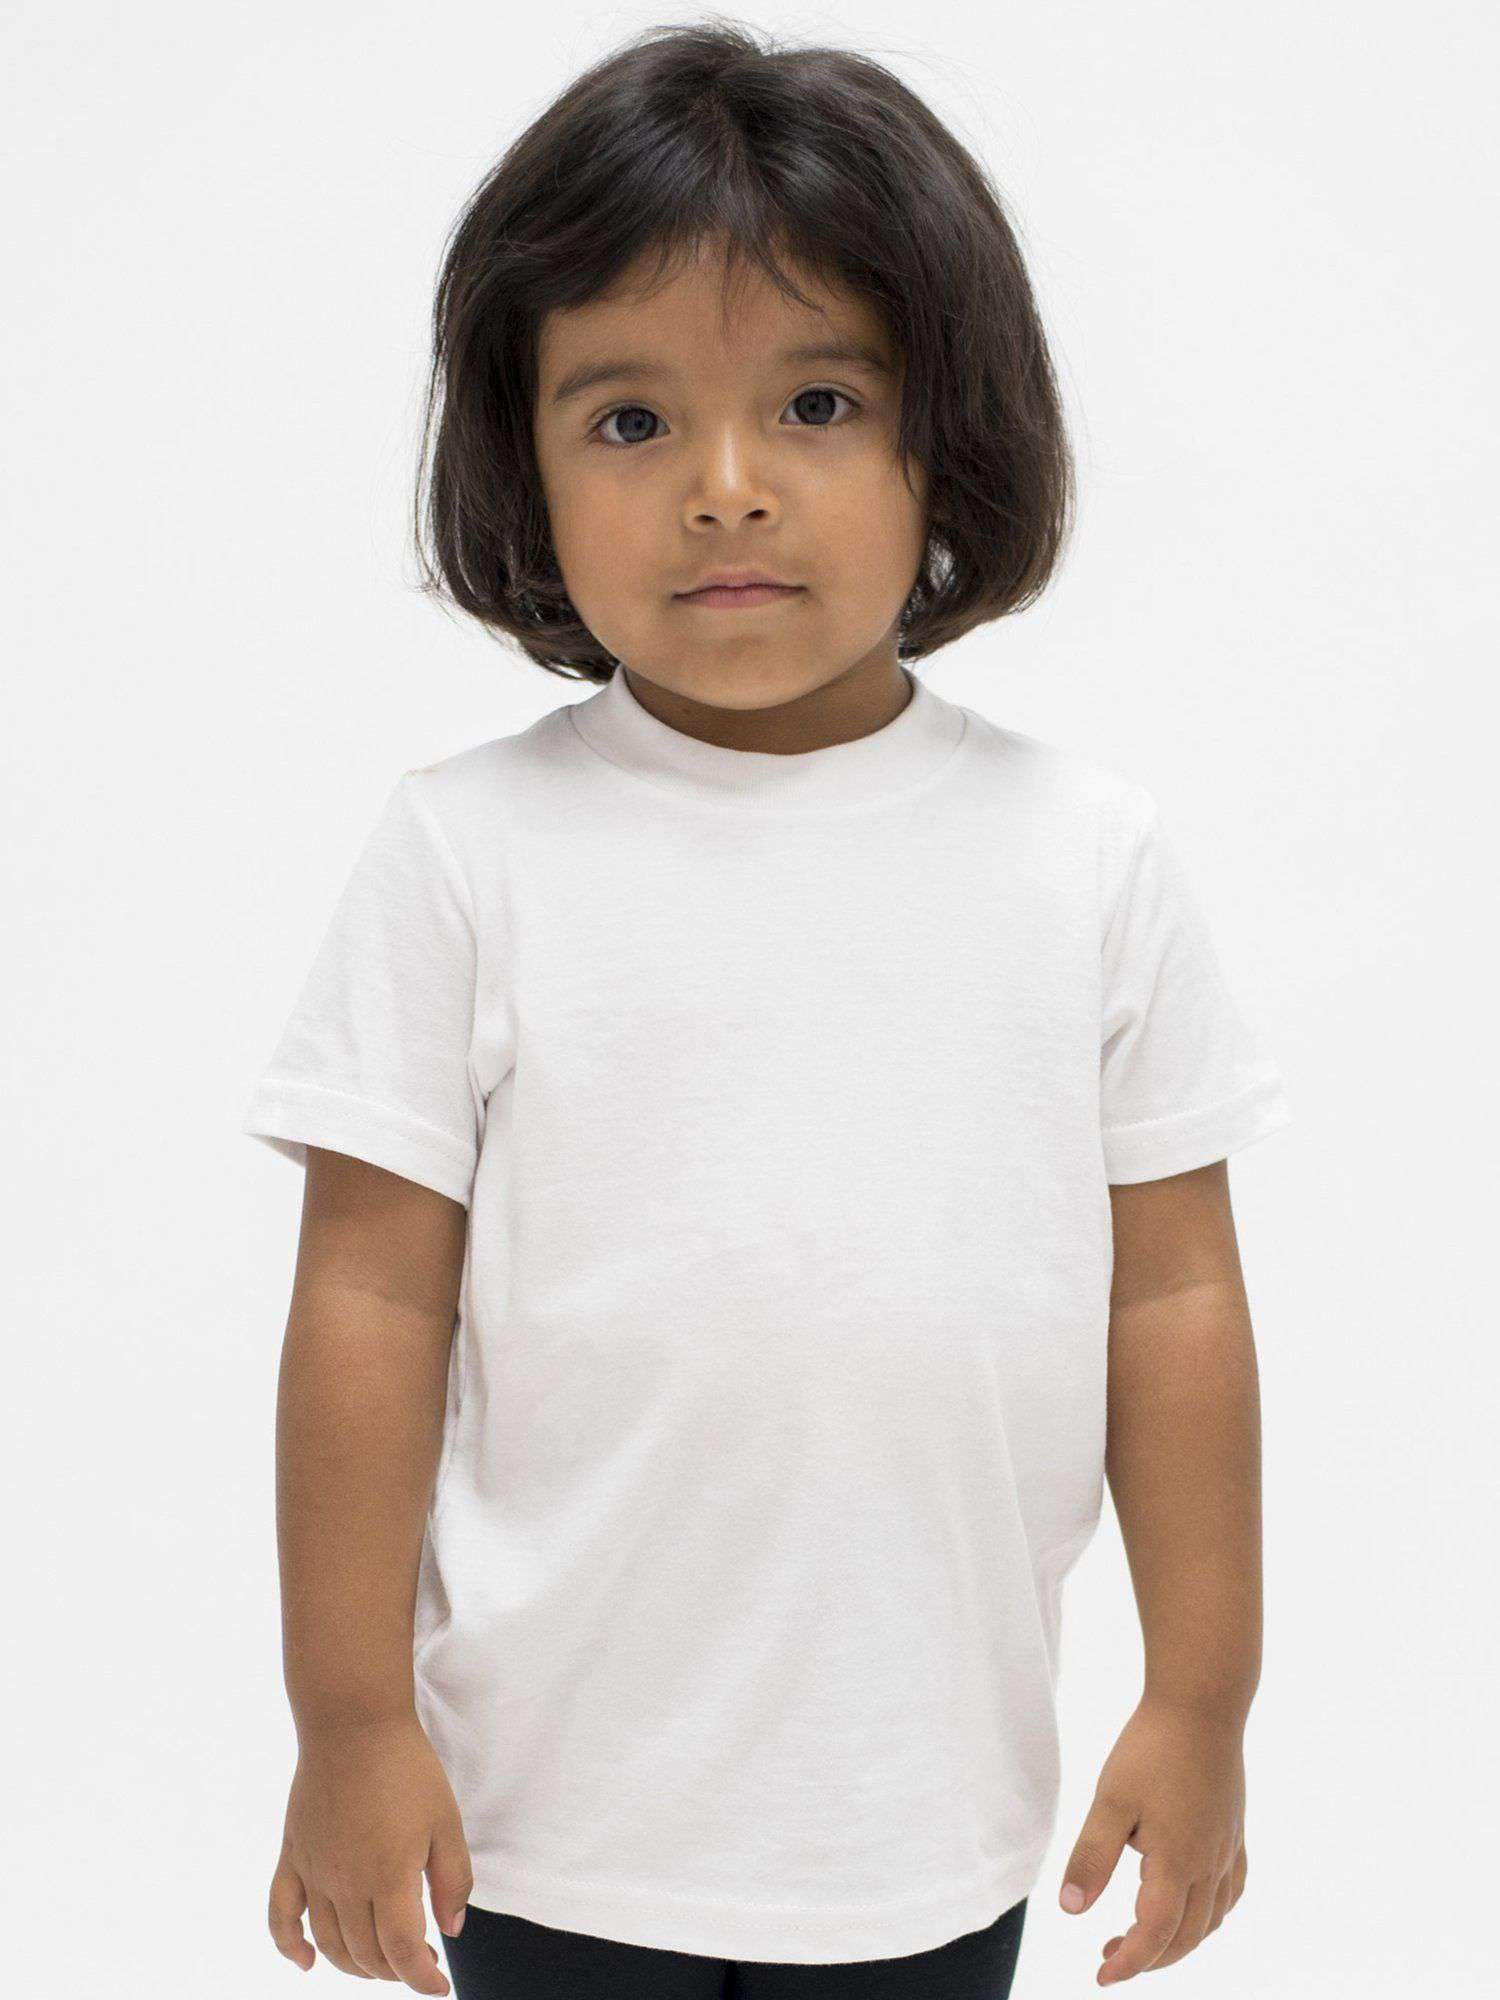 21005 - Toddler Short Sleeve Fine Jersey Tee Kids Los Angeles Apparel White 2 